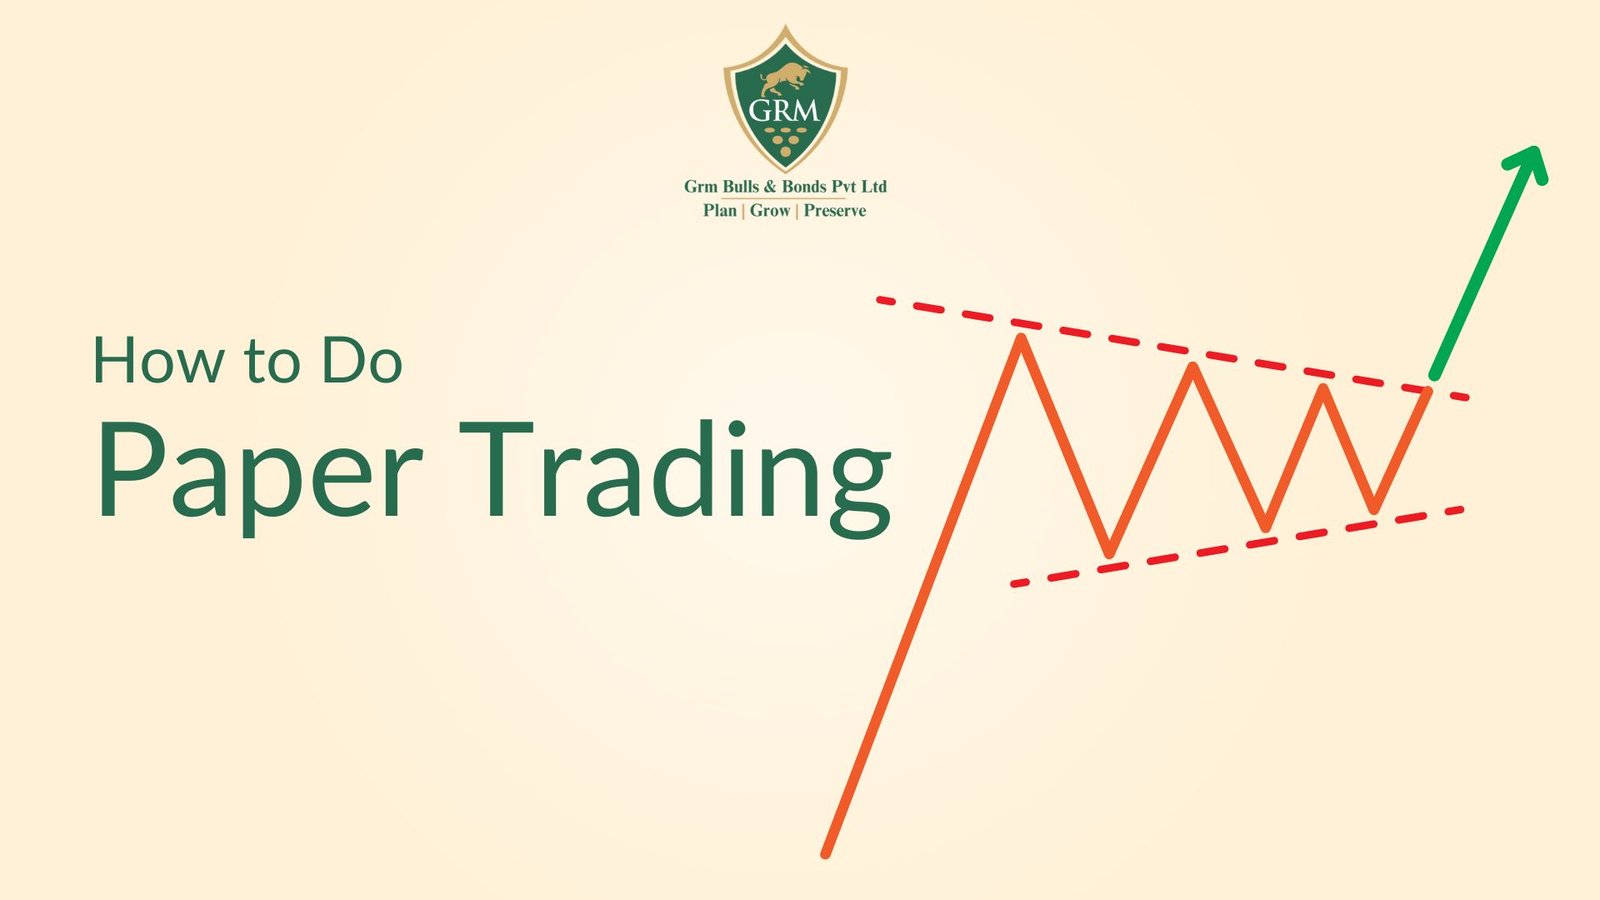 How to Do Paper Trading